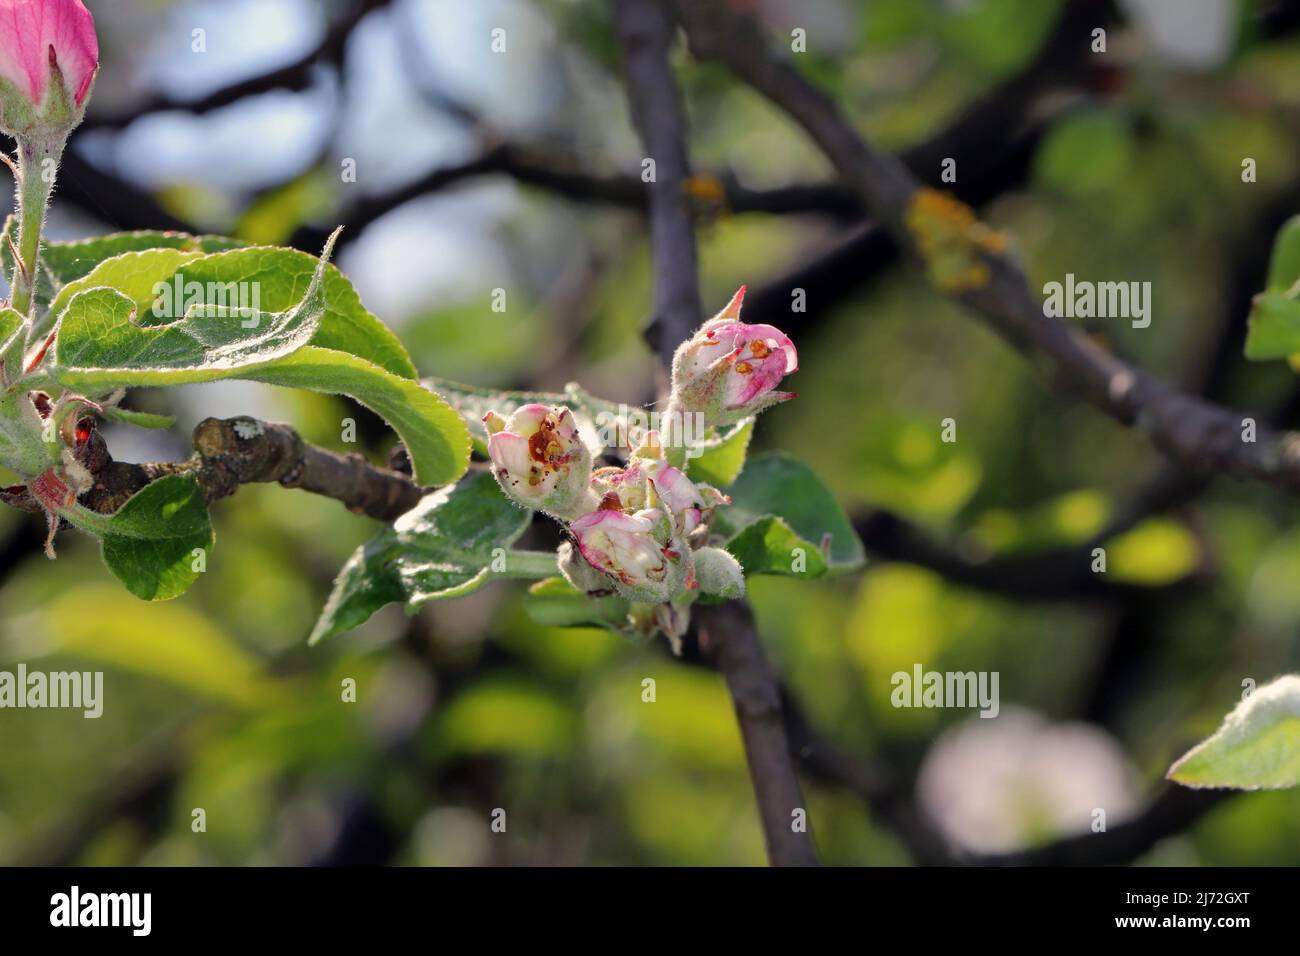 Buds, flowers, young leaves of apple trees damaged by the parasite caterpillars of Winter Moth (Operophtera brumata) in the orchard. Stock Photo